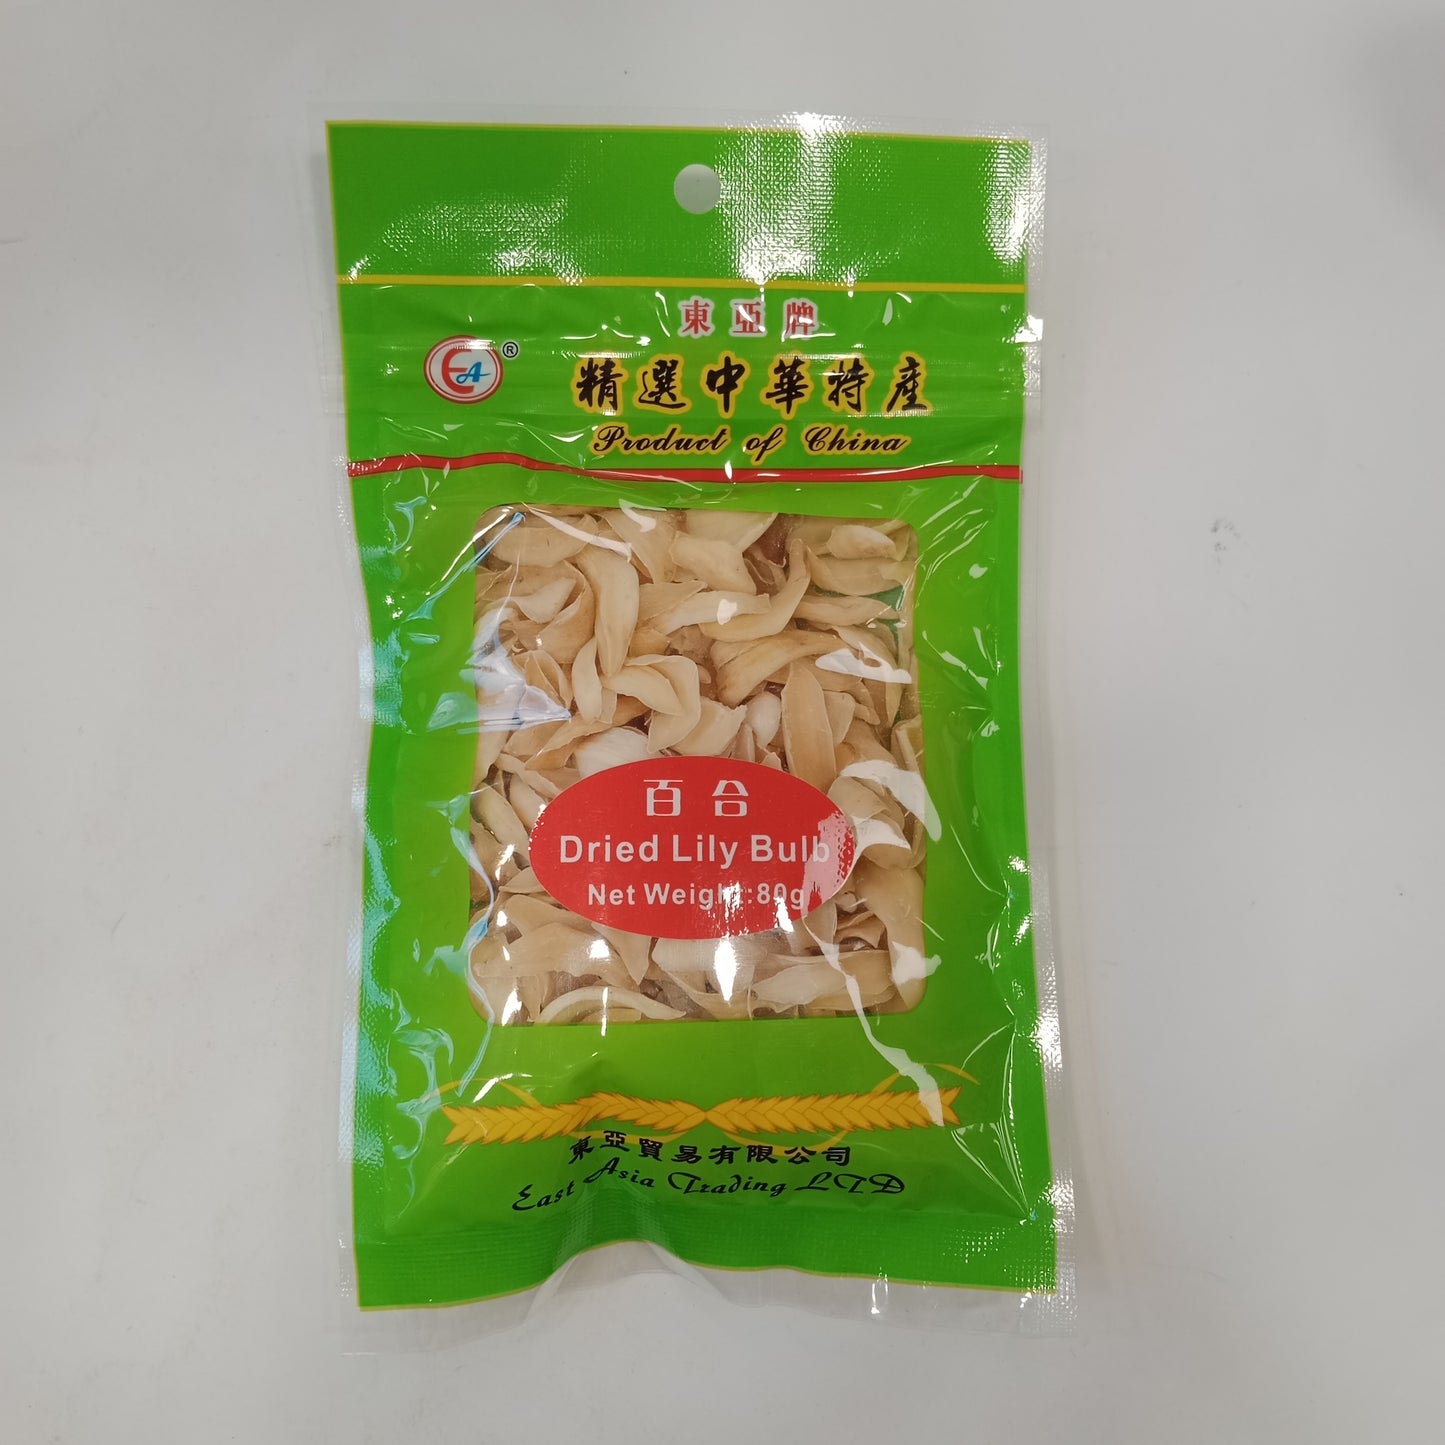 Dried Lily Bulb (Small Pack) 80g